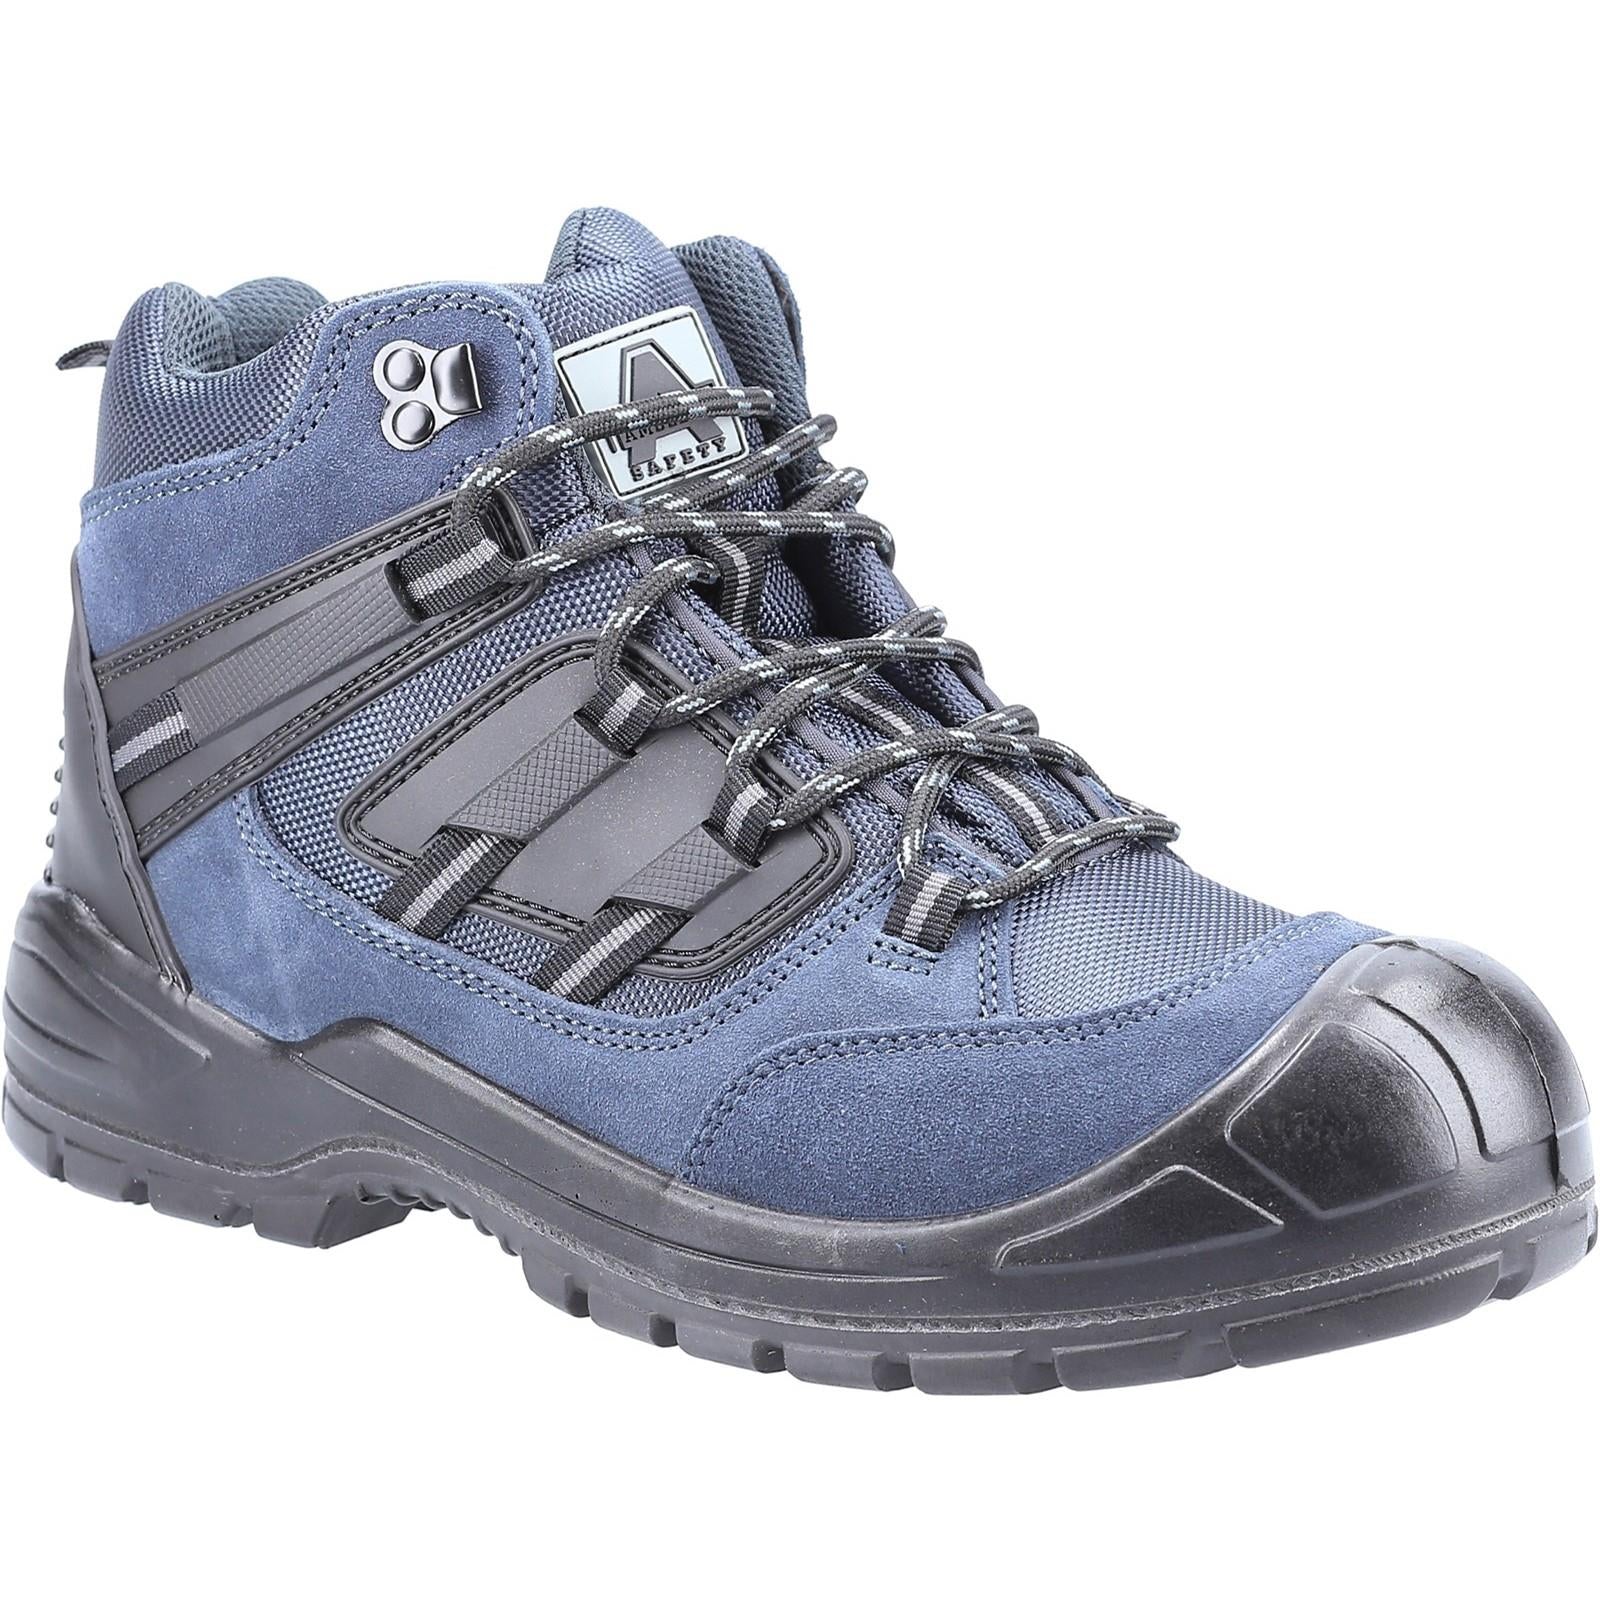 Amblers S1P navy suede steel toe/midsole safety hiker work boot #AS257